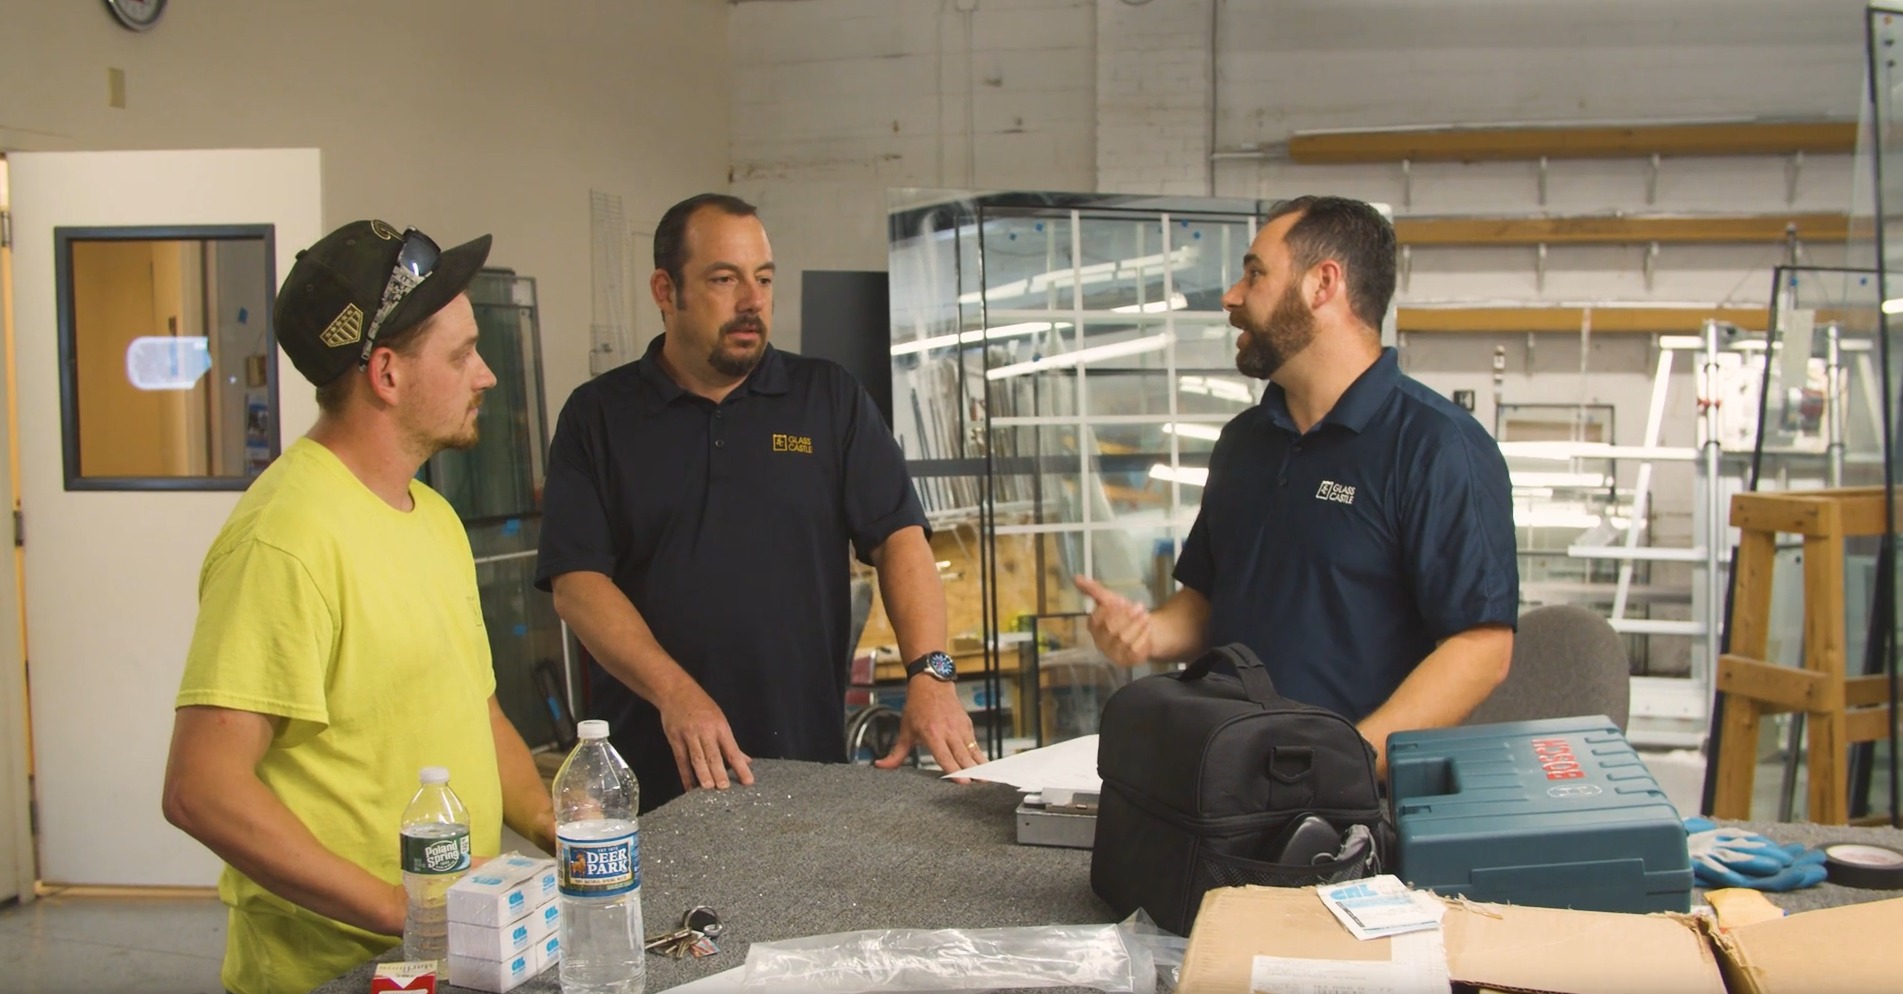 Scott Kingsland uses Smart-Toolbox to manage his glass businesses